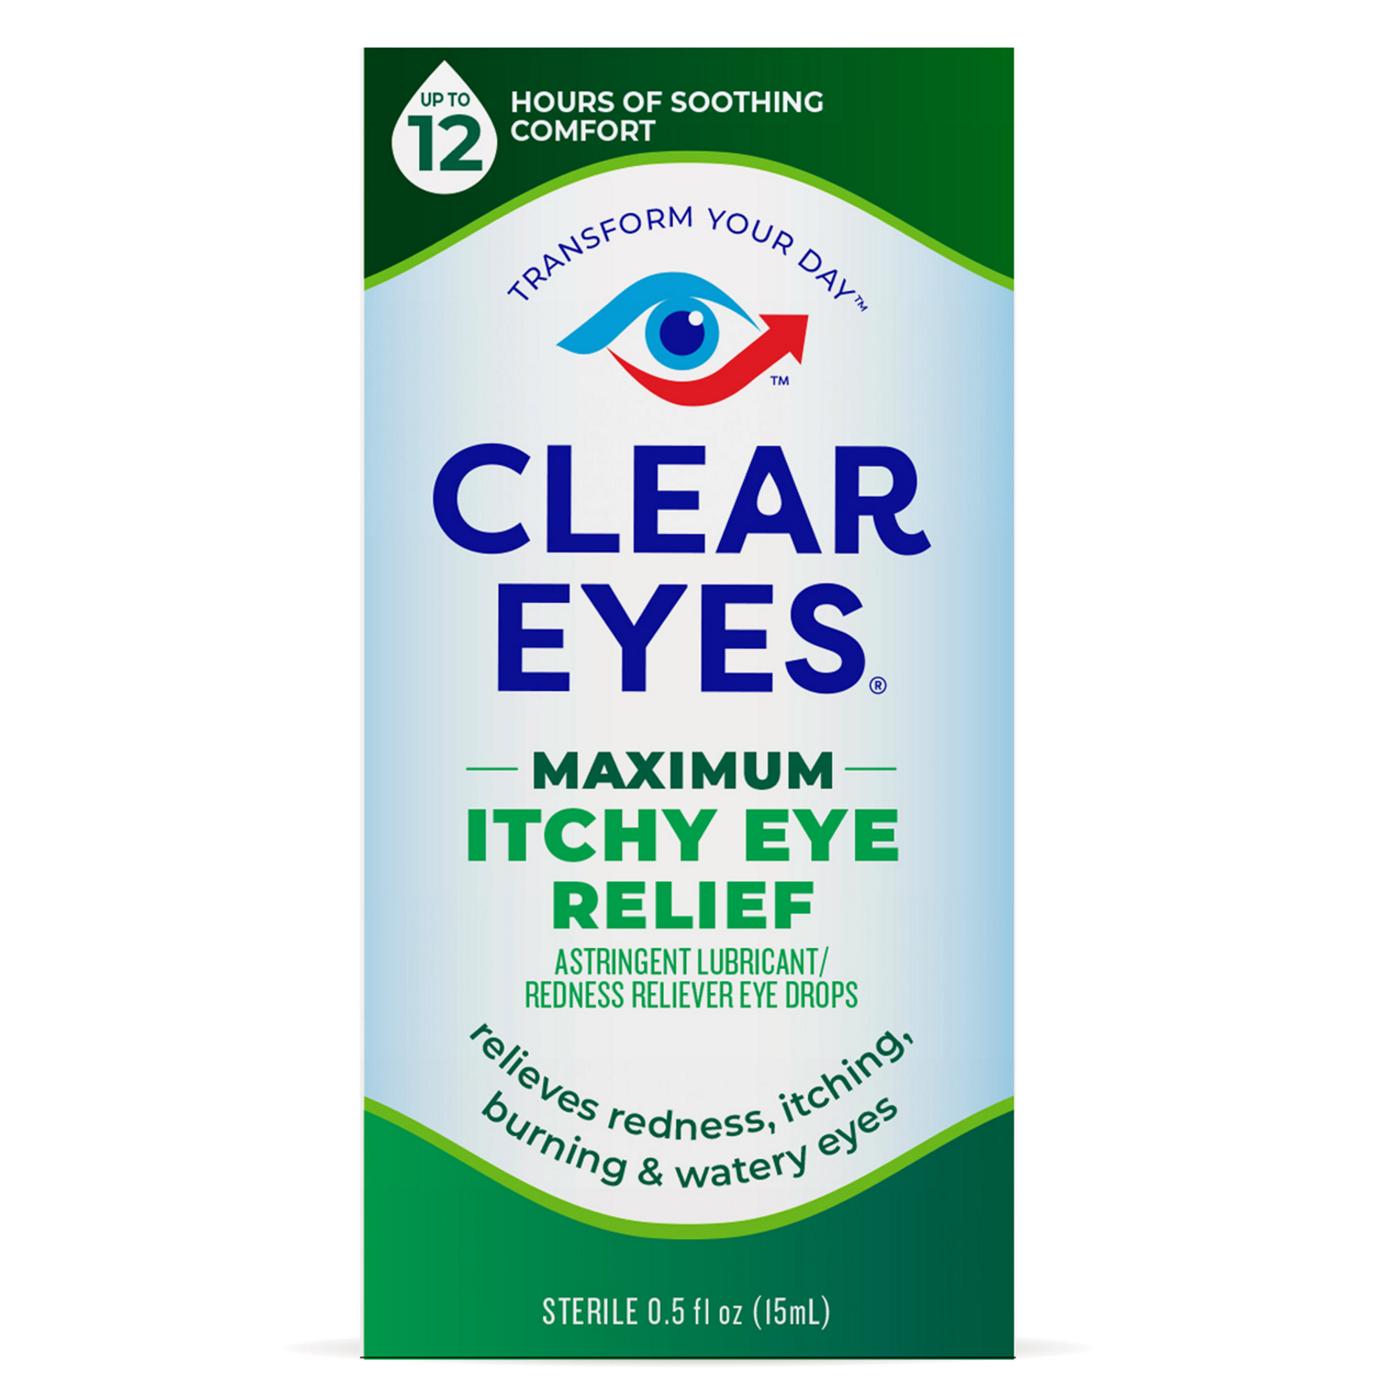 Clear Eyes Max Itchy Eye Relief Eye Drops; image 1 of 5